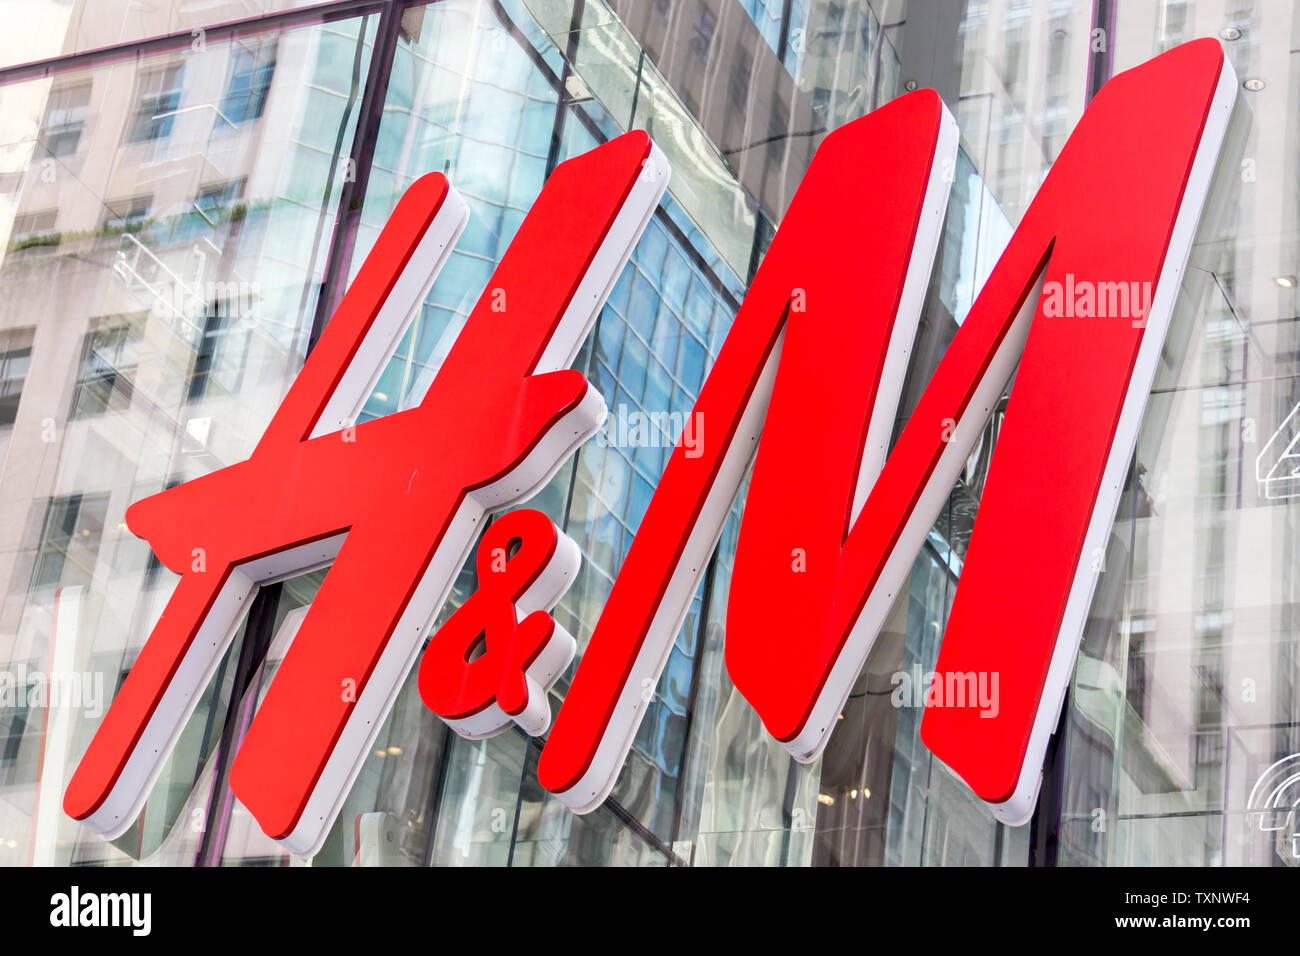 Page 4 - H And M Store High Resolution Stock Photography and Images - Alamy